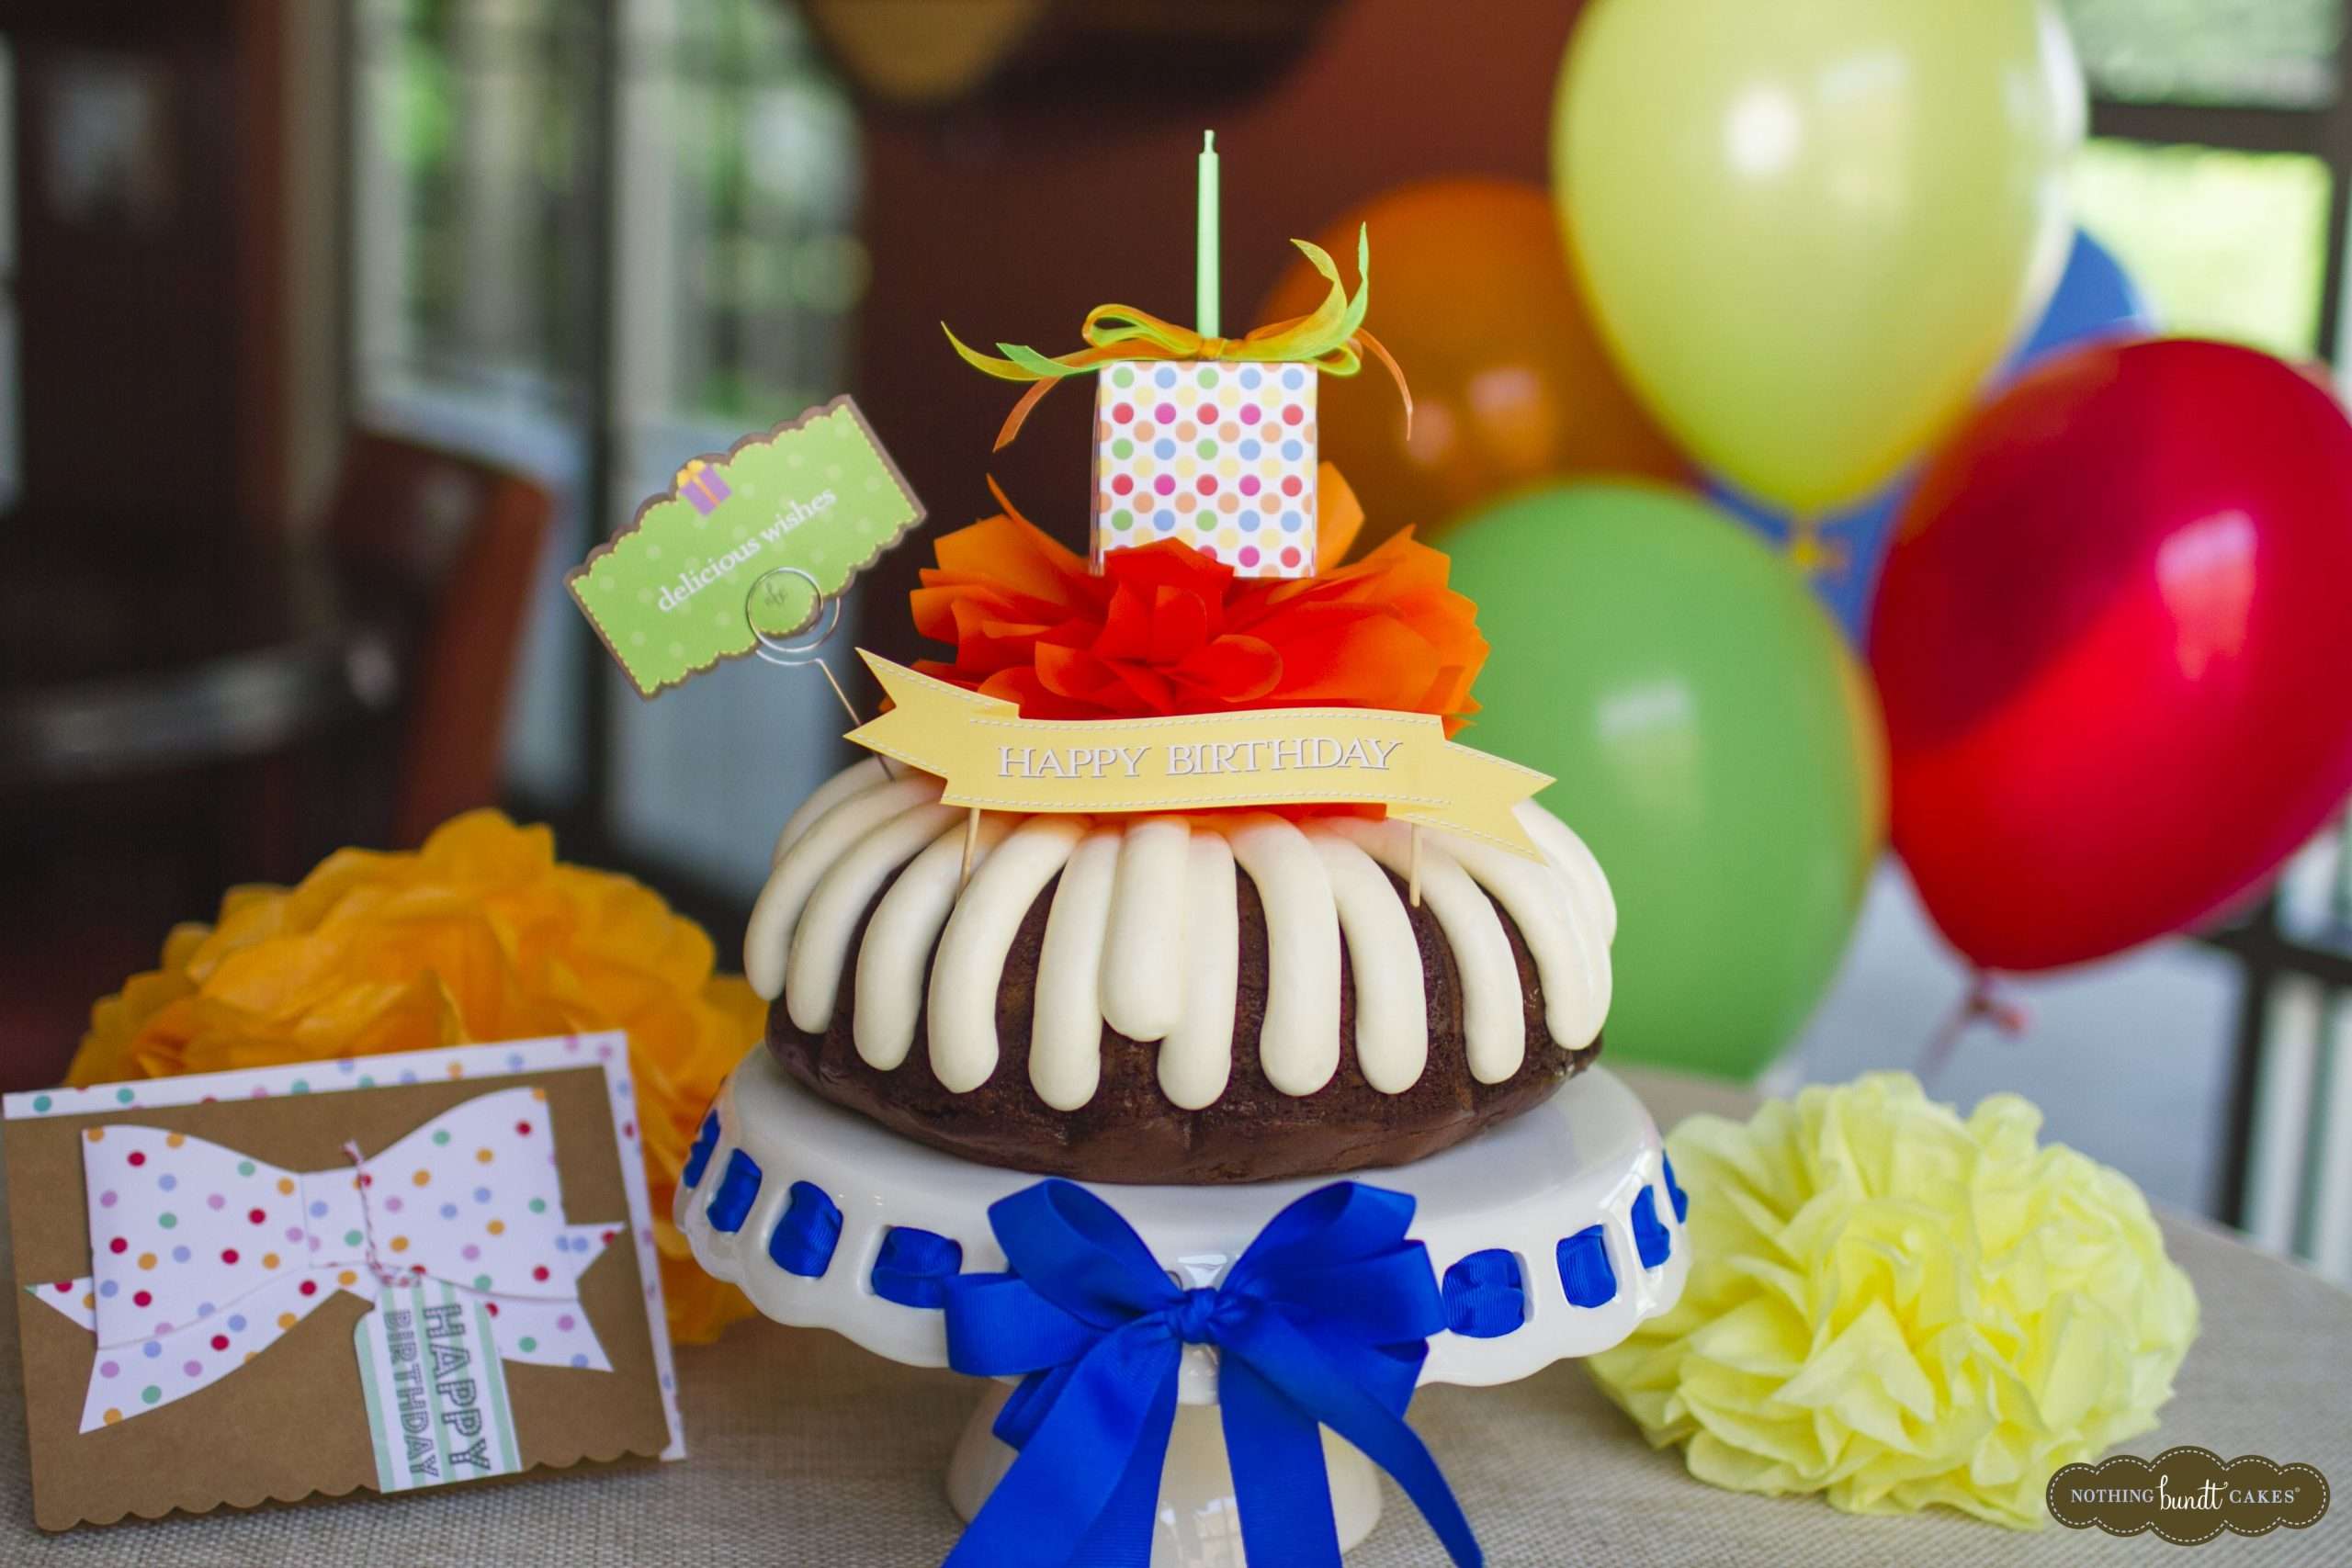 Pin on Have a Happier Birthday with Nothing Bundt Cakes